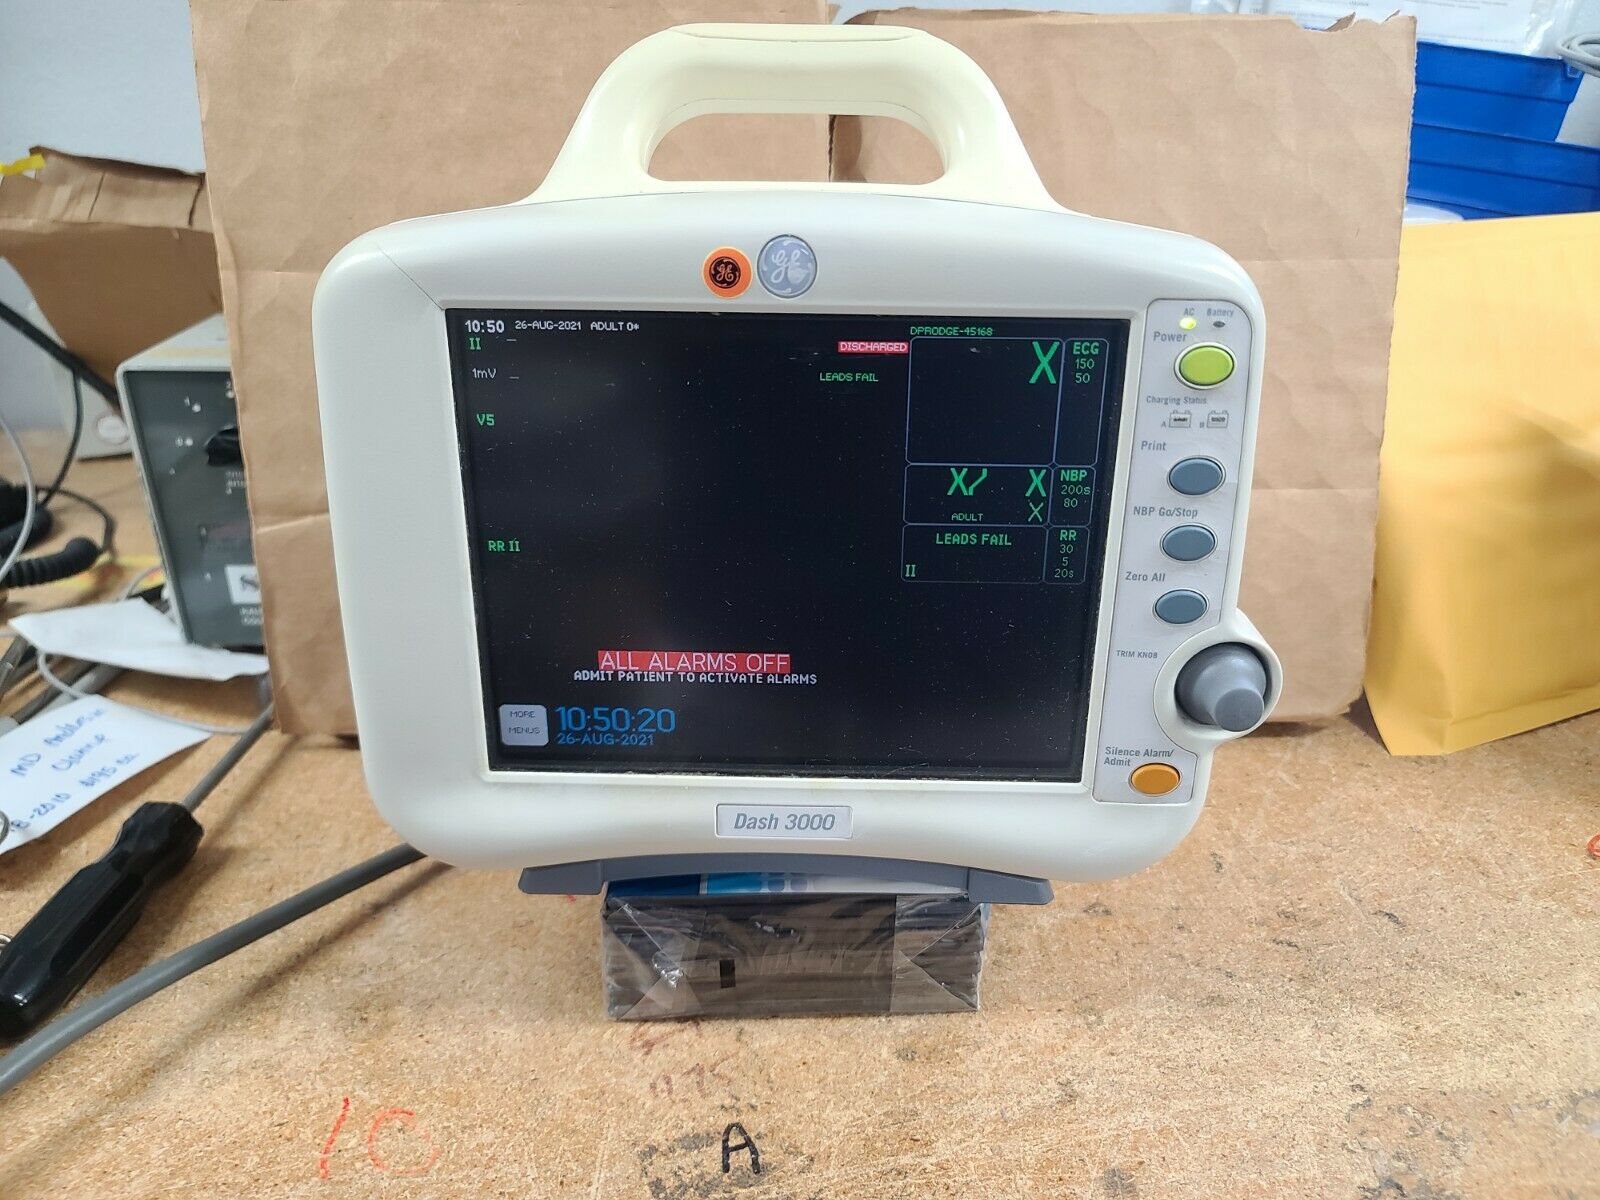 GE DASH 3000 COLOR PATIENT MONITOR WITH PRINTER AS pictured working